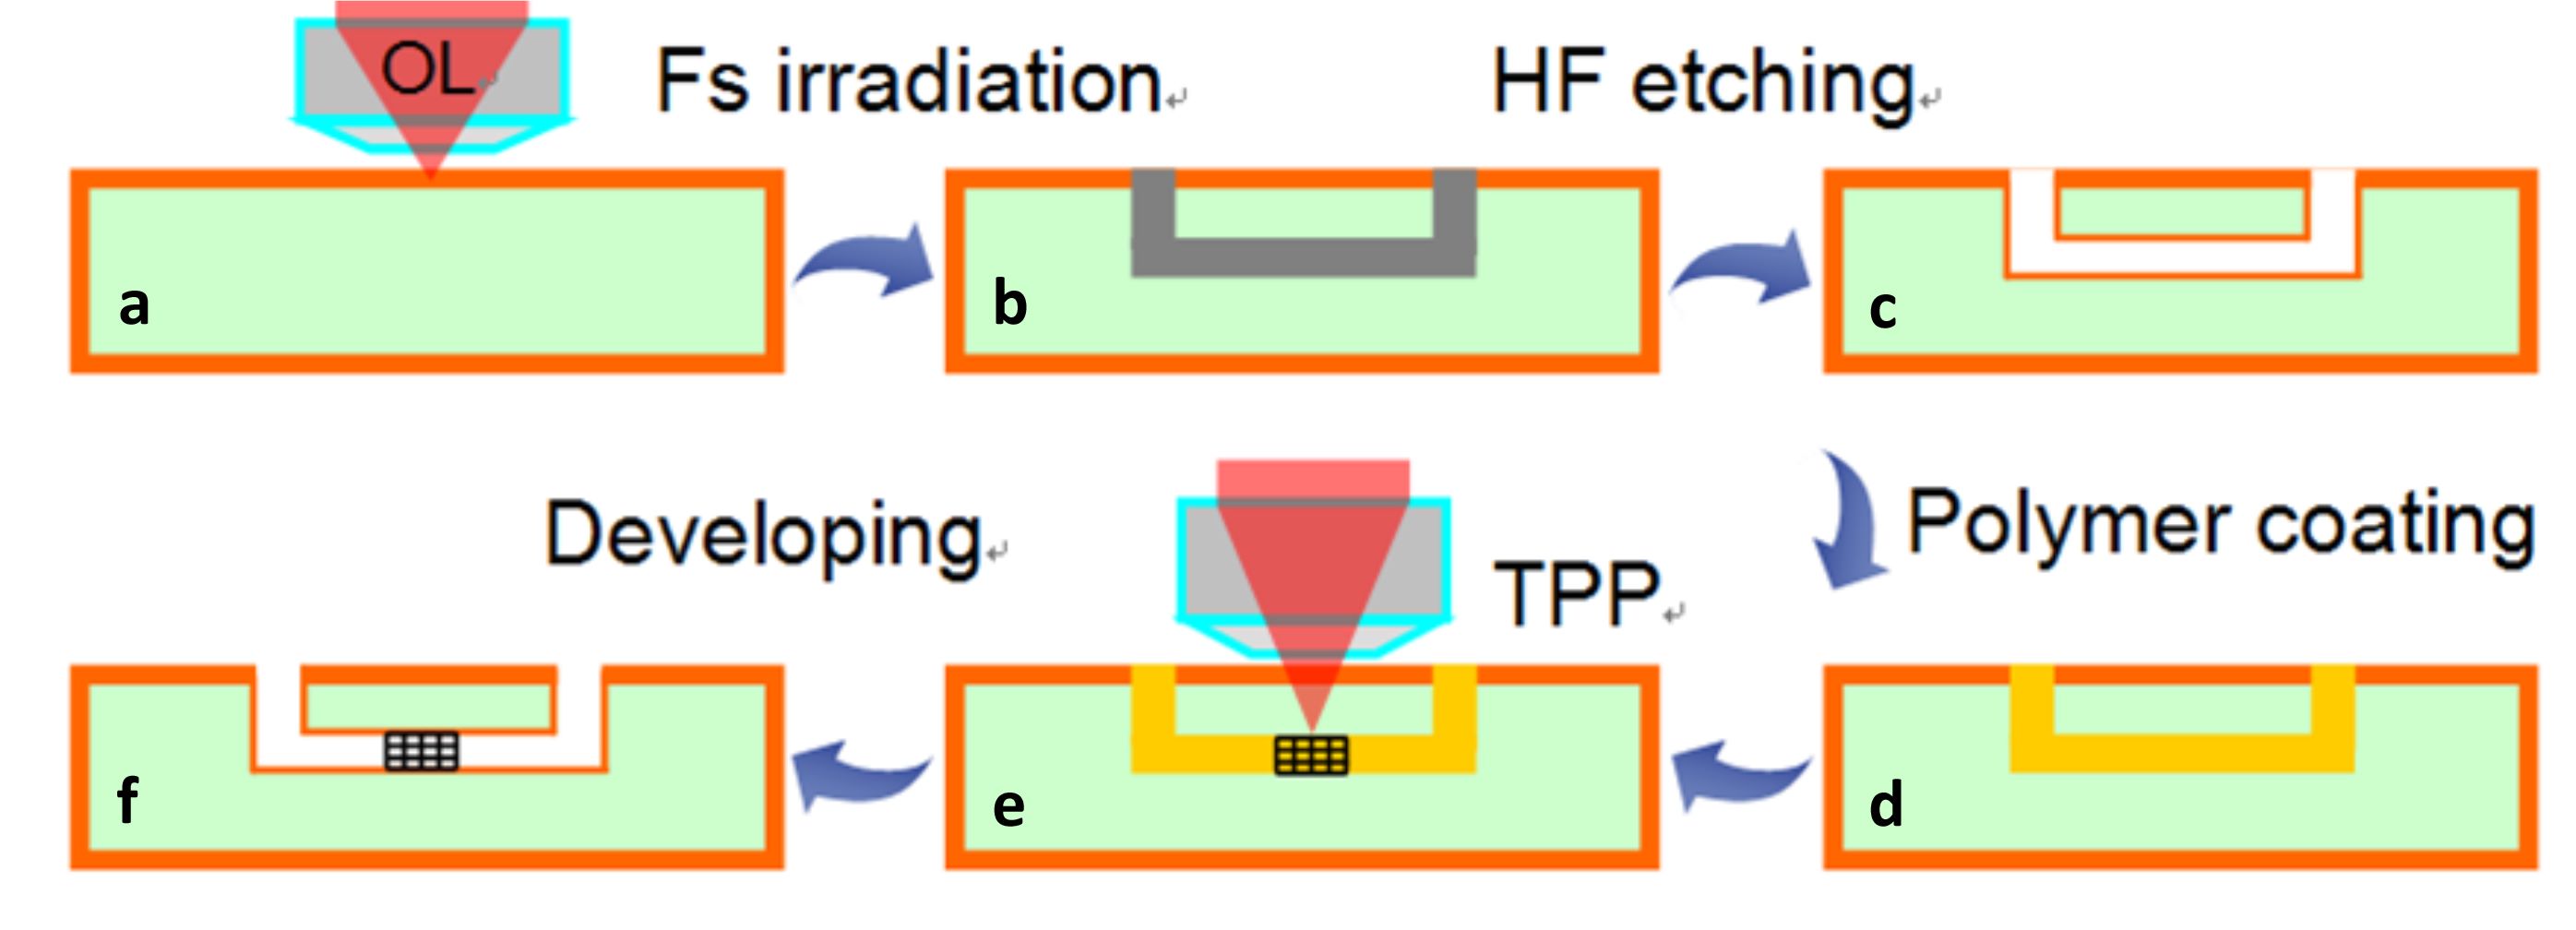 Hybrid Femtosecond Laser 3D Microfabrication: Reliable Tool for Fabrication of Functional Biochips